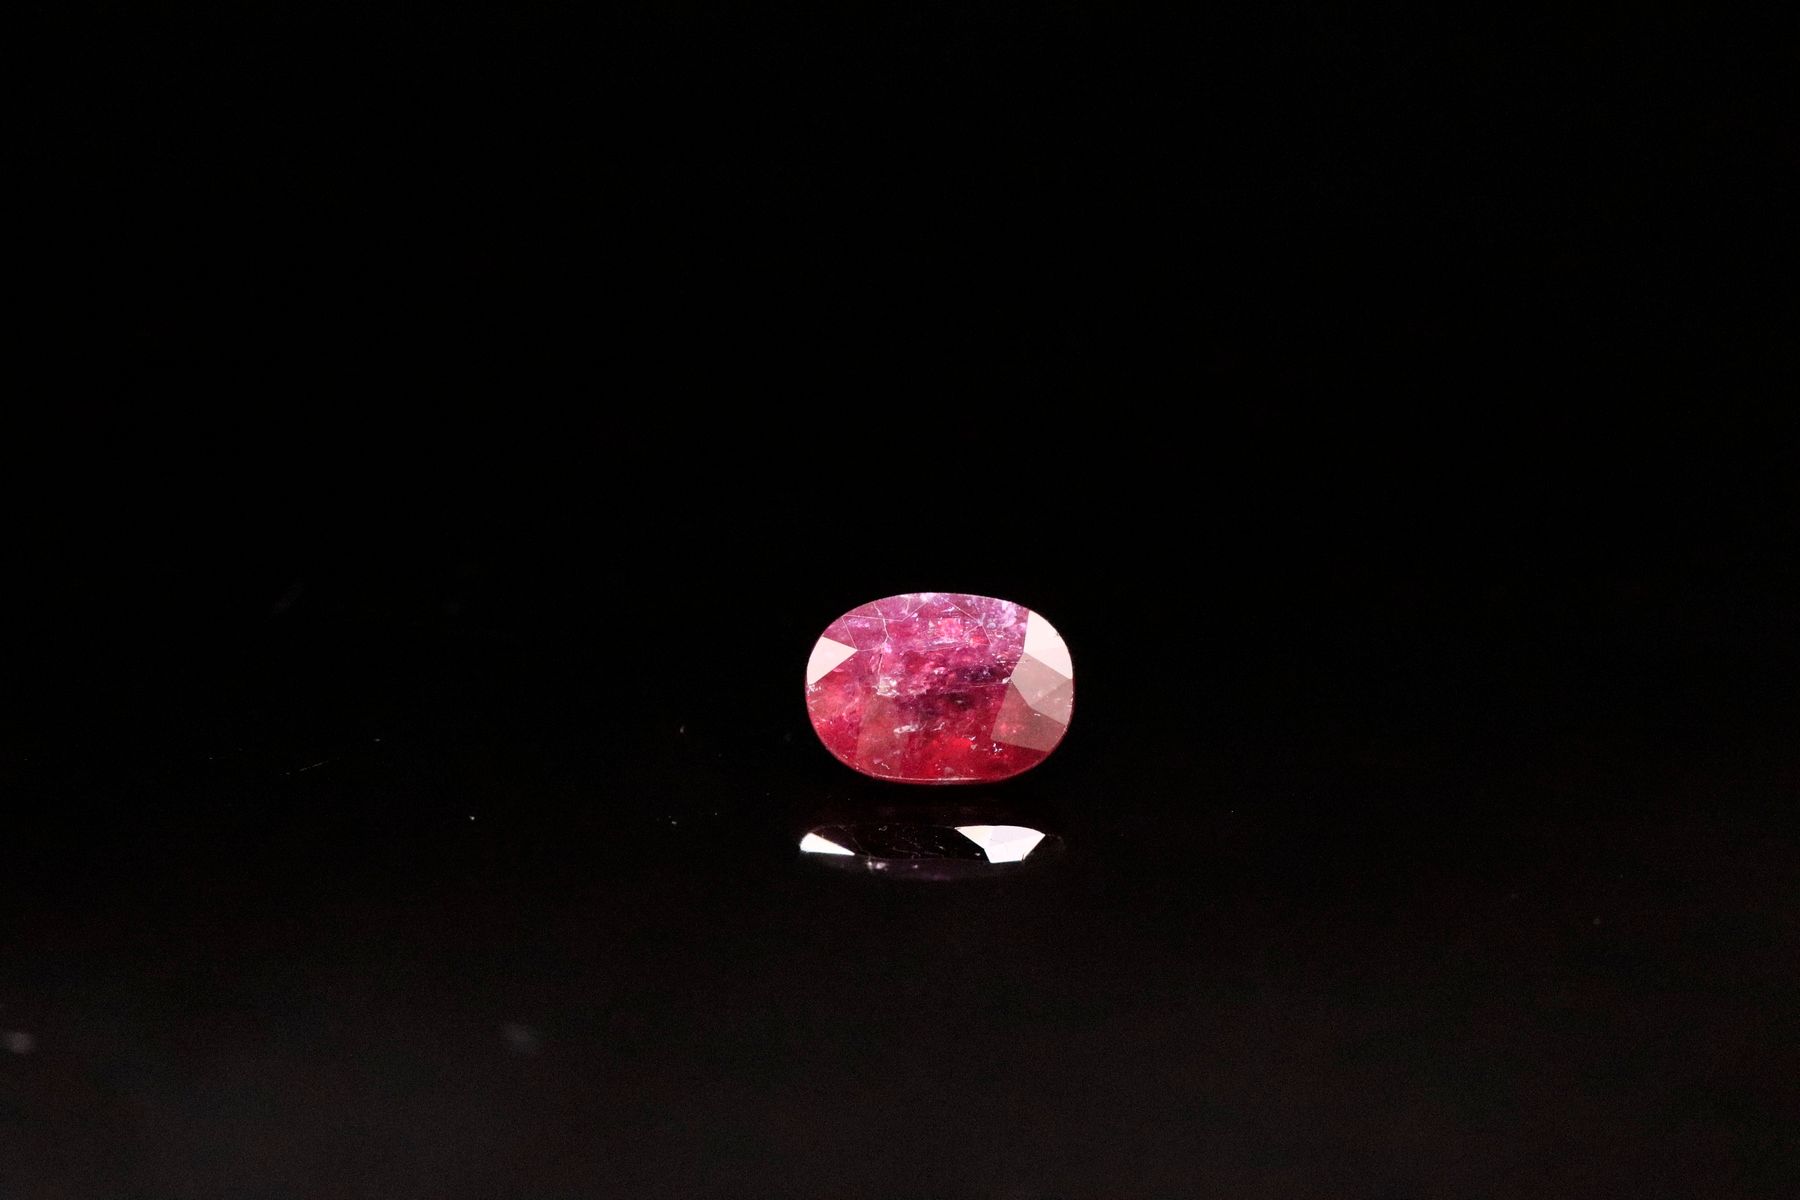 Null Oval ruby on paper.
Weight : 1.04 ct

Dimensions: 7mm x 5mm